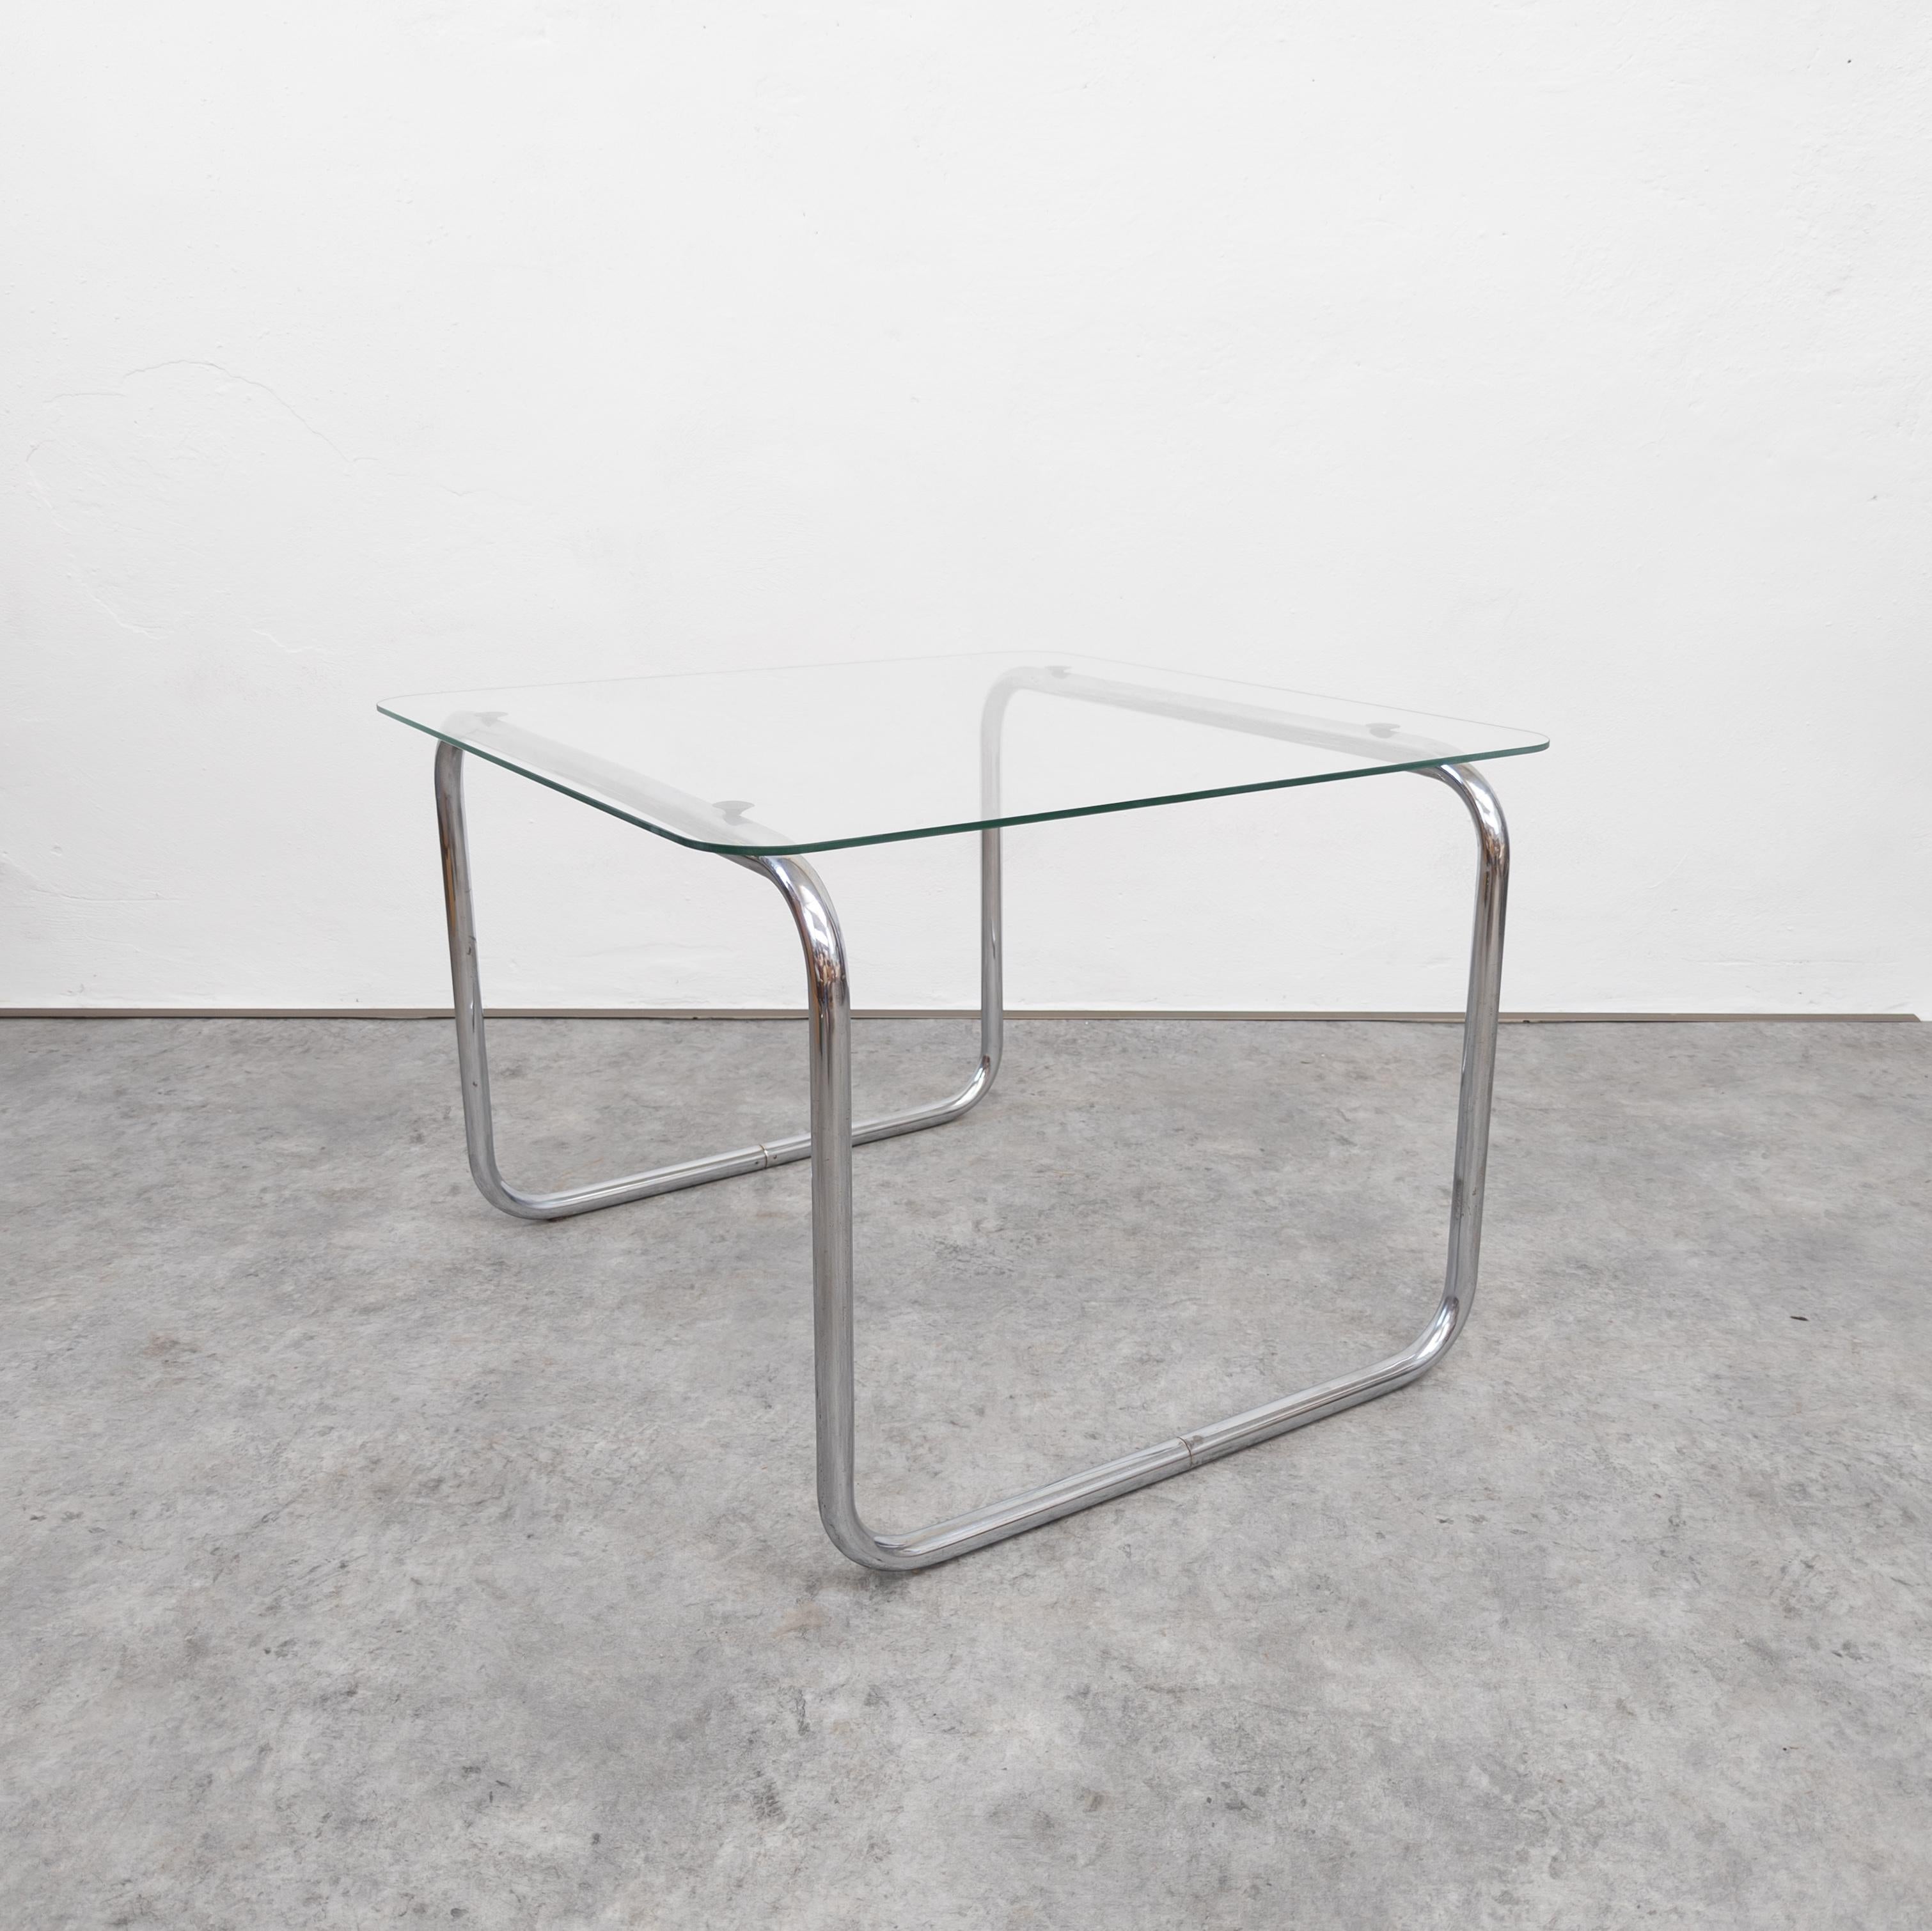 Based on the design by Marcel Breuer, manufactured by Kovona, former Slezák company in Czechoslovakia early 1950's. Chrome plated steel tubes in very good original condition with only minor scratches. Glass top without any chips. Measures: height 50